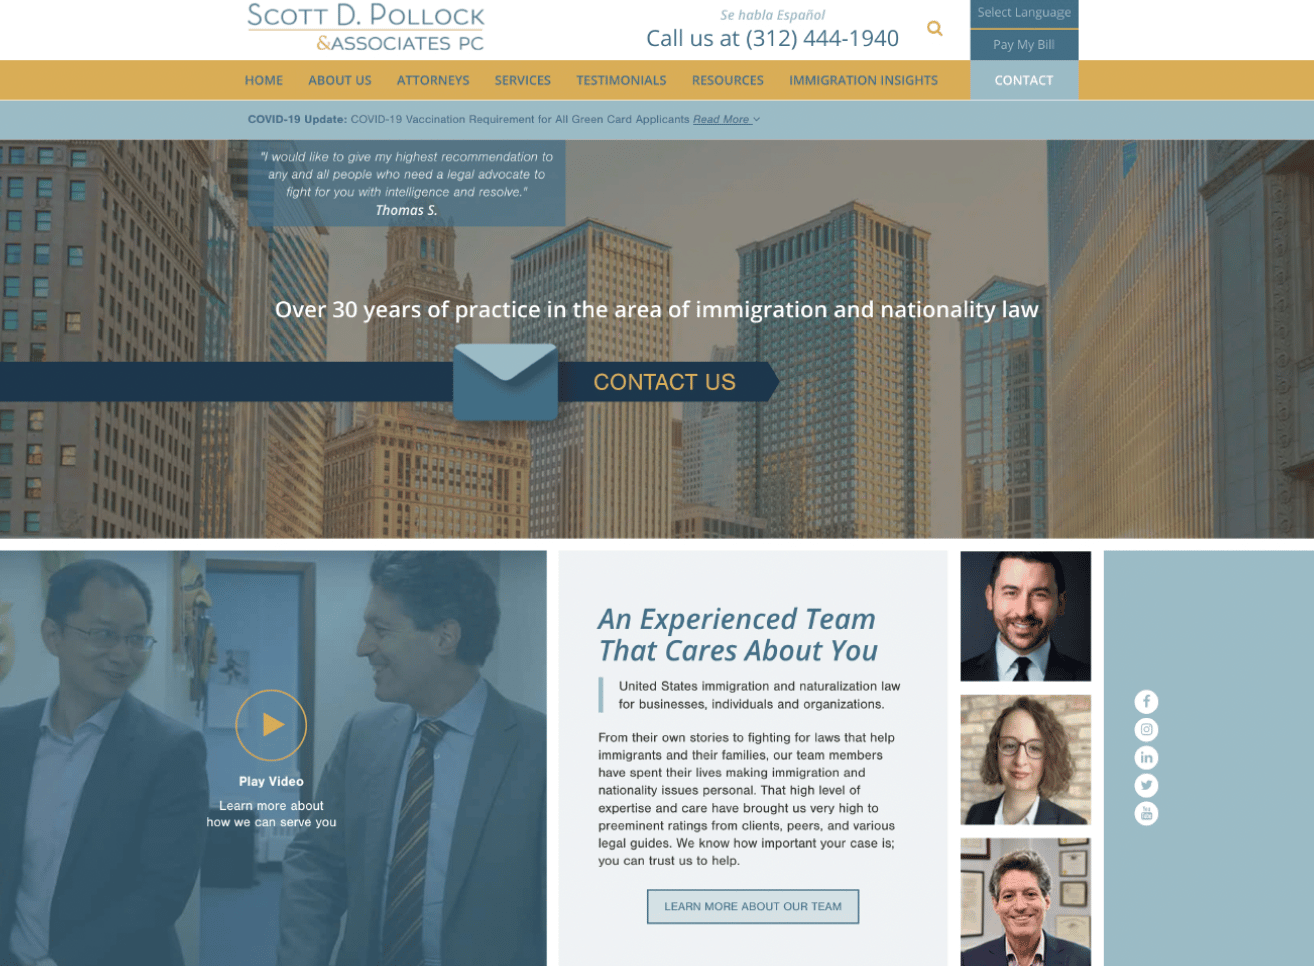 Image of Scott D. Pollock and Associates, P.C.'s modern website after working with Metric